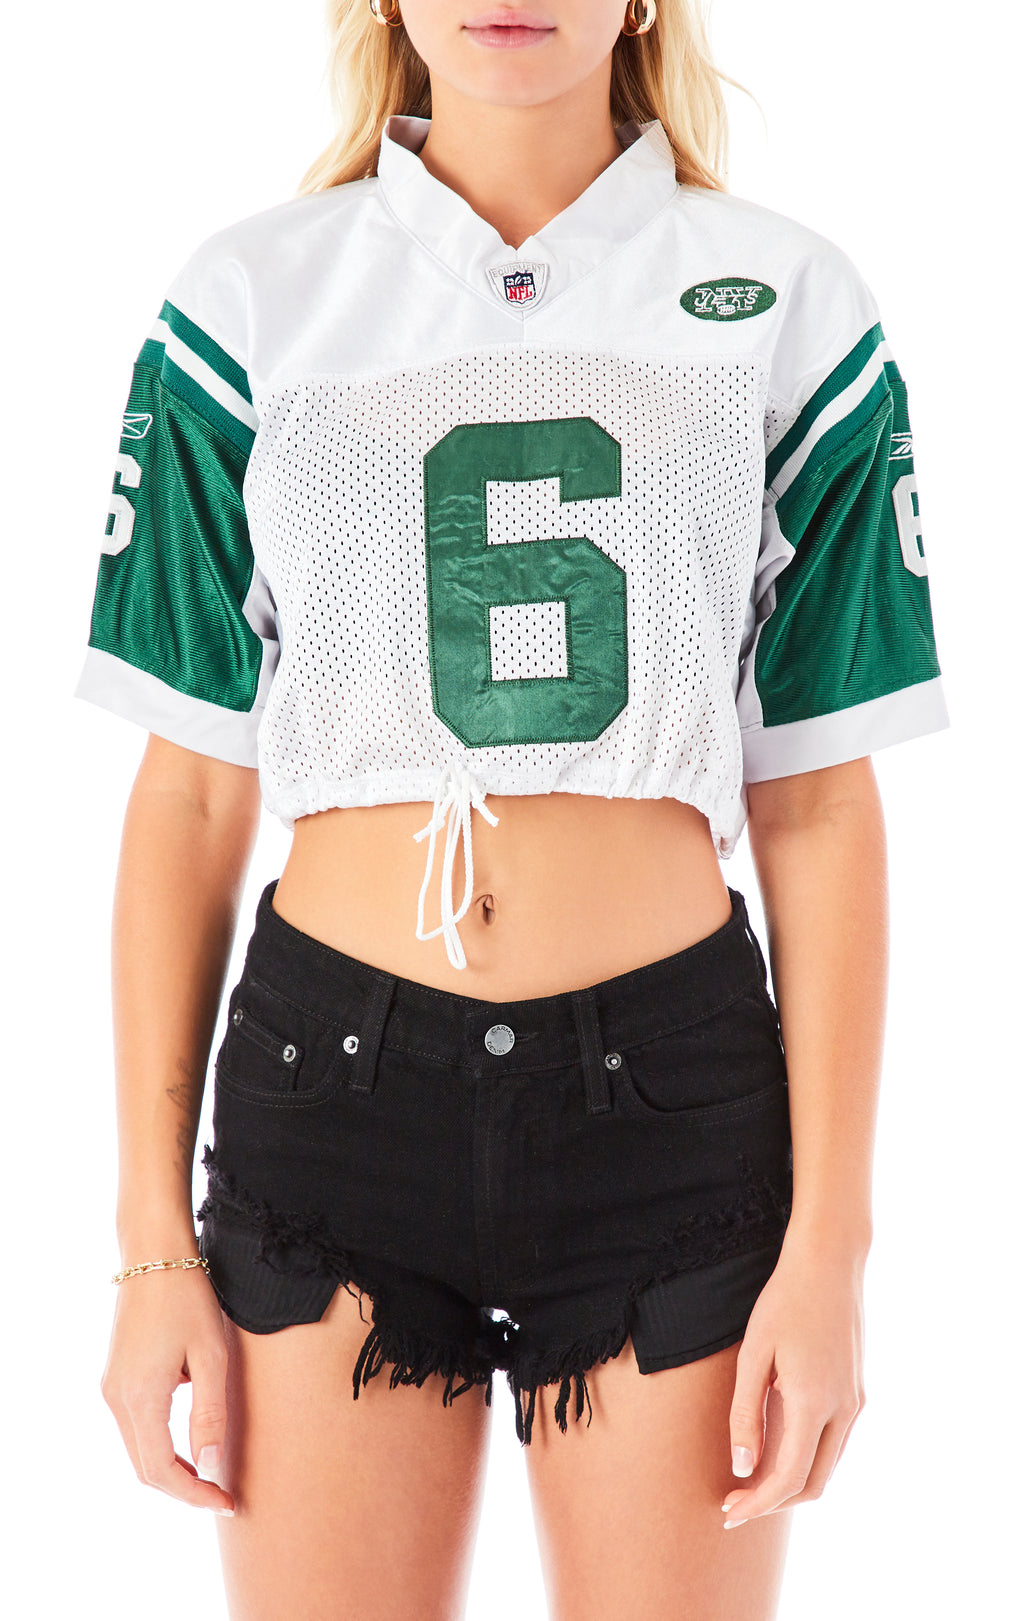 Cropped Nfl Jersey Shop, SAVE 45% 